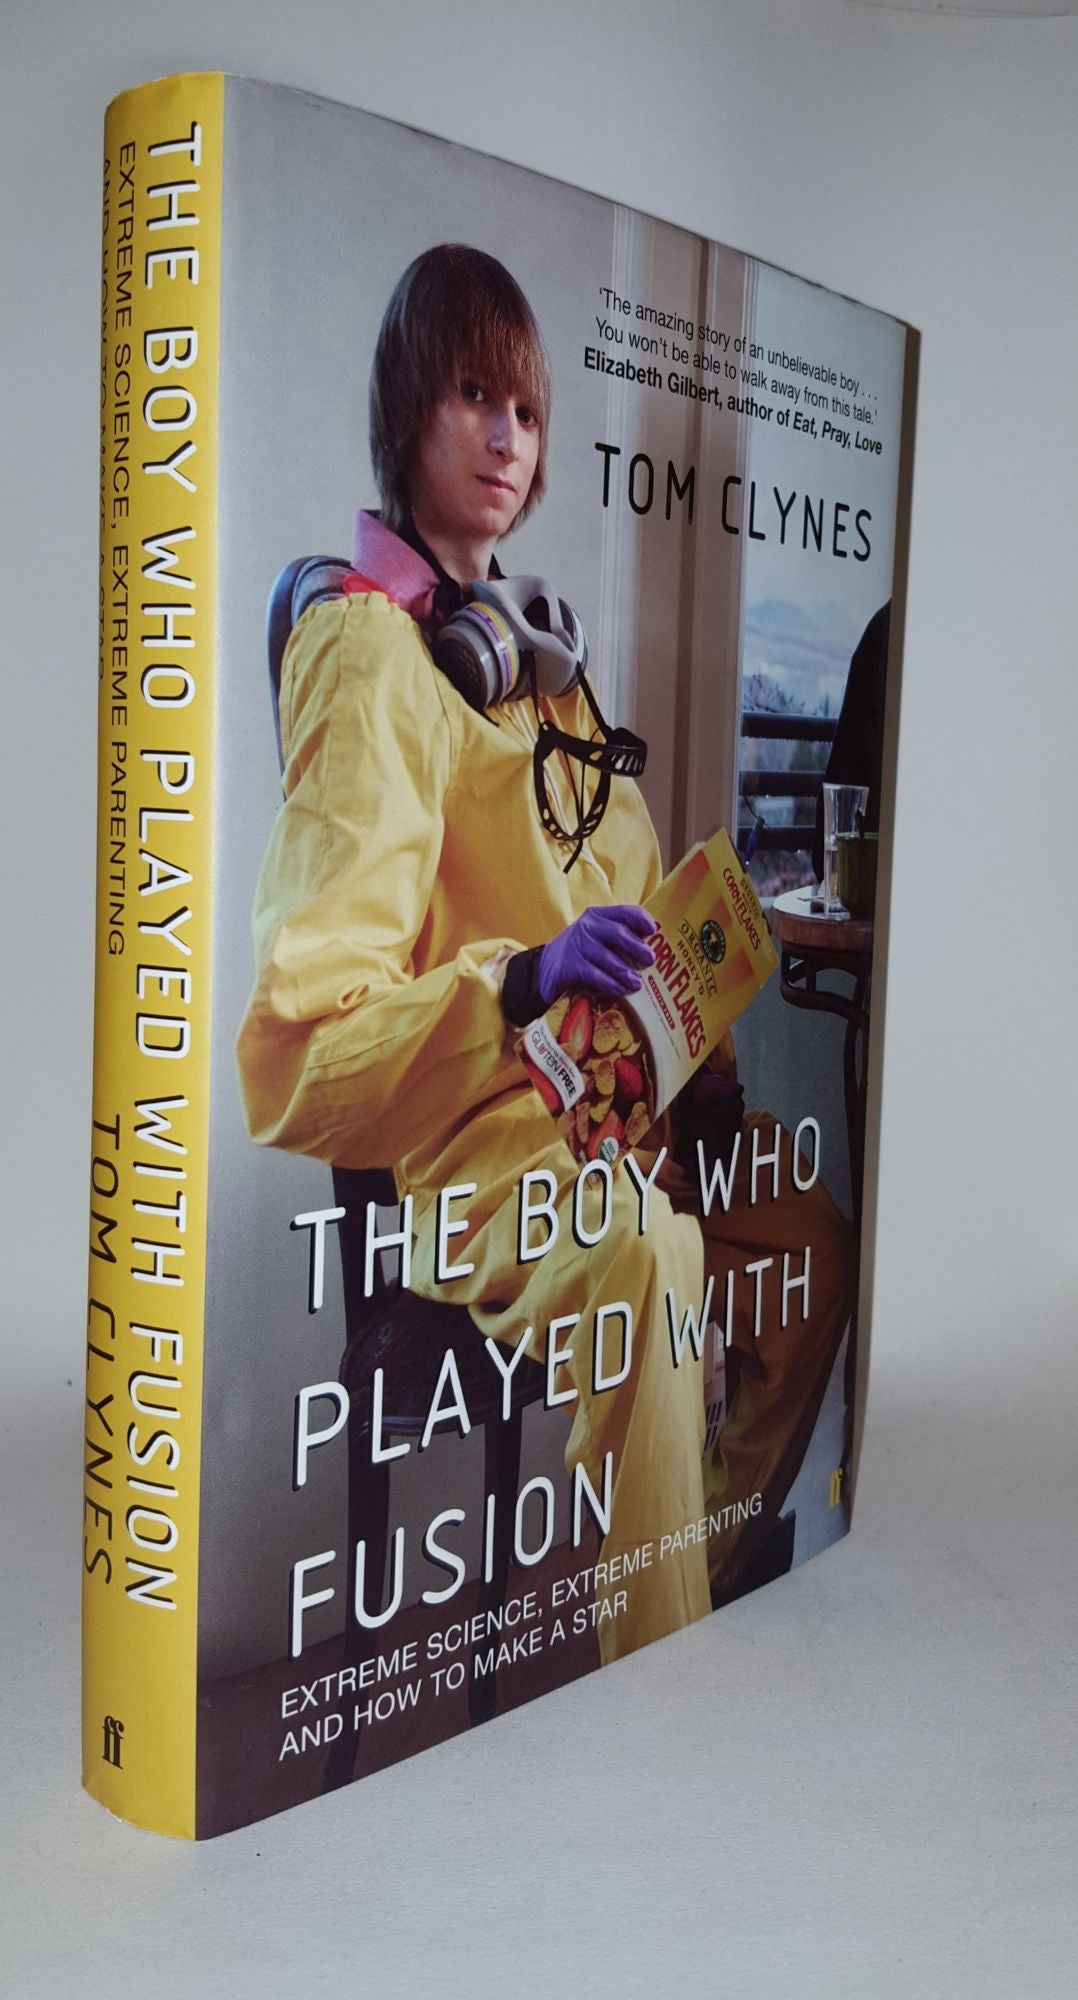 CLYNES Tom - The Boy Who Played with Fusion Extreme Science Extreme Parenting and How to Make a Star